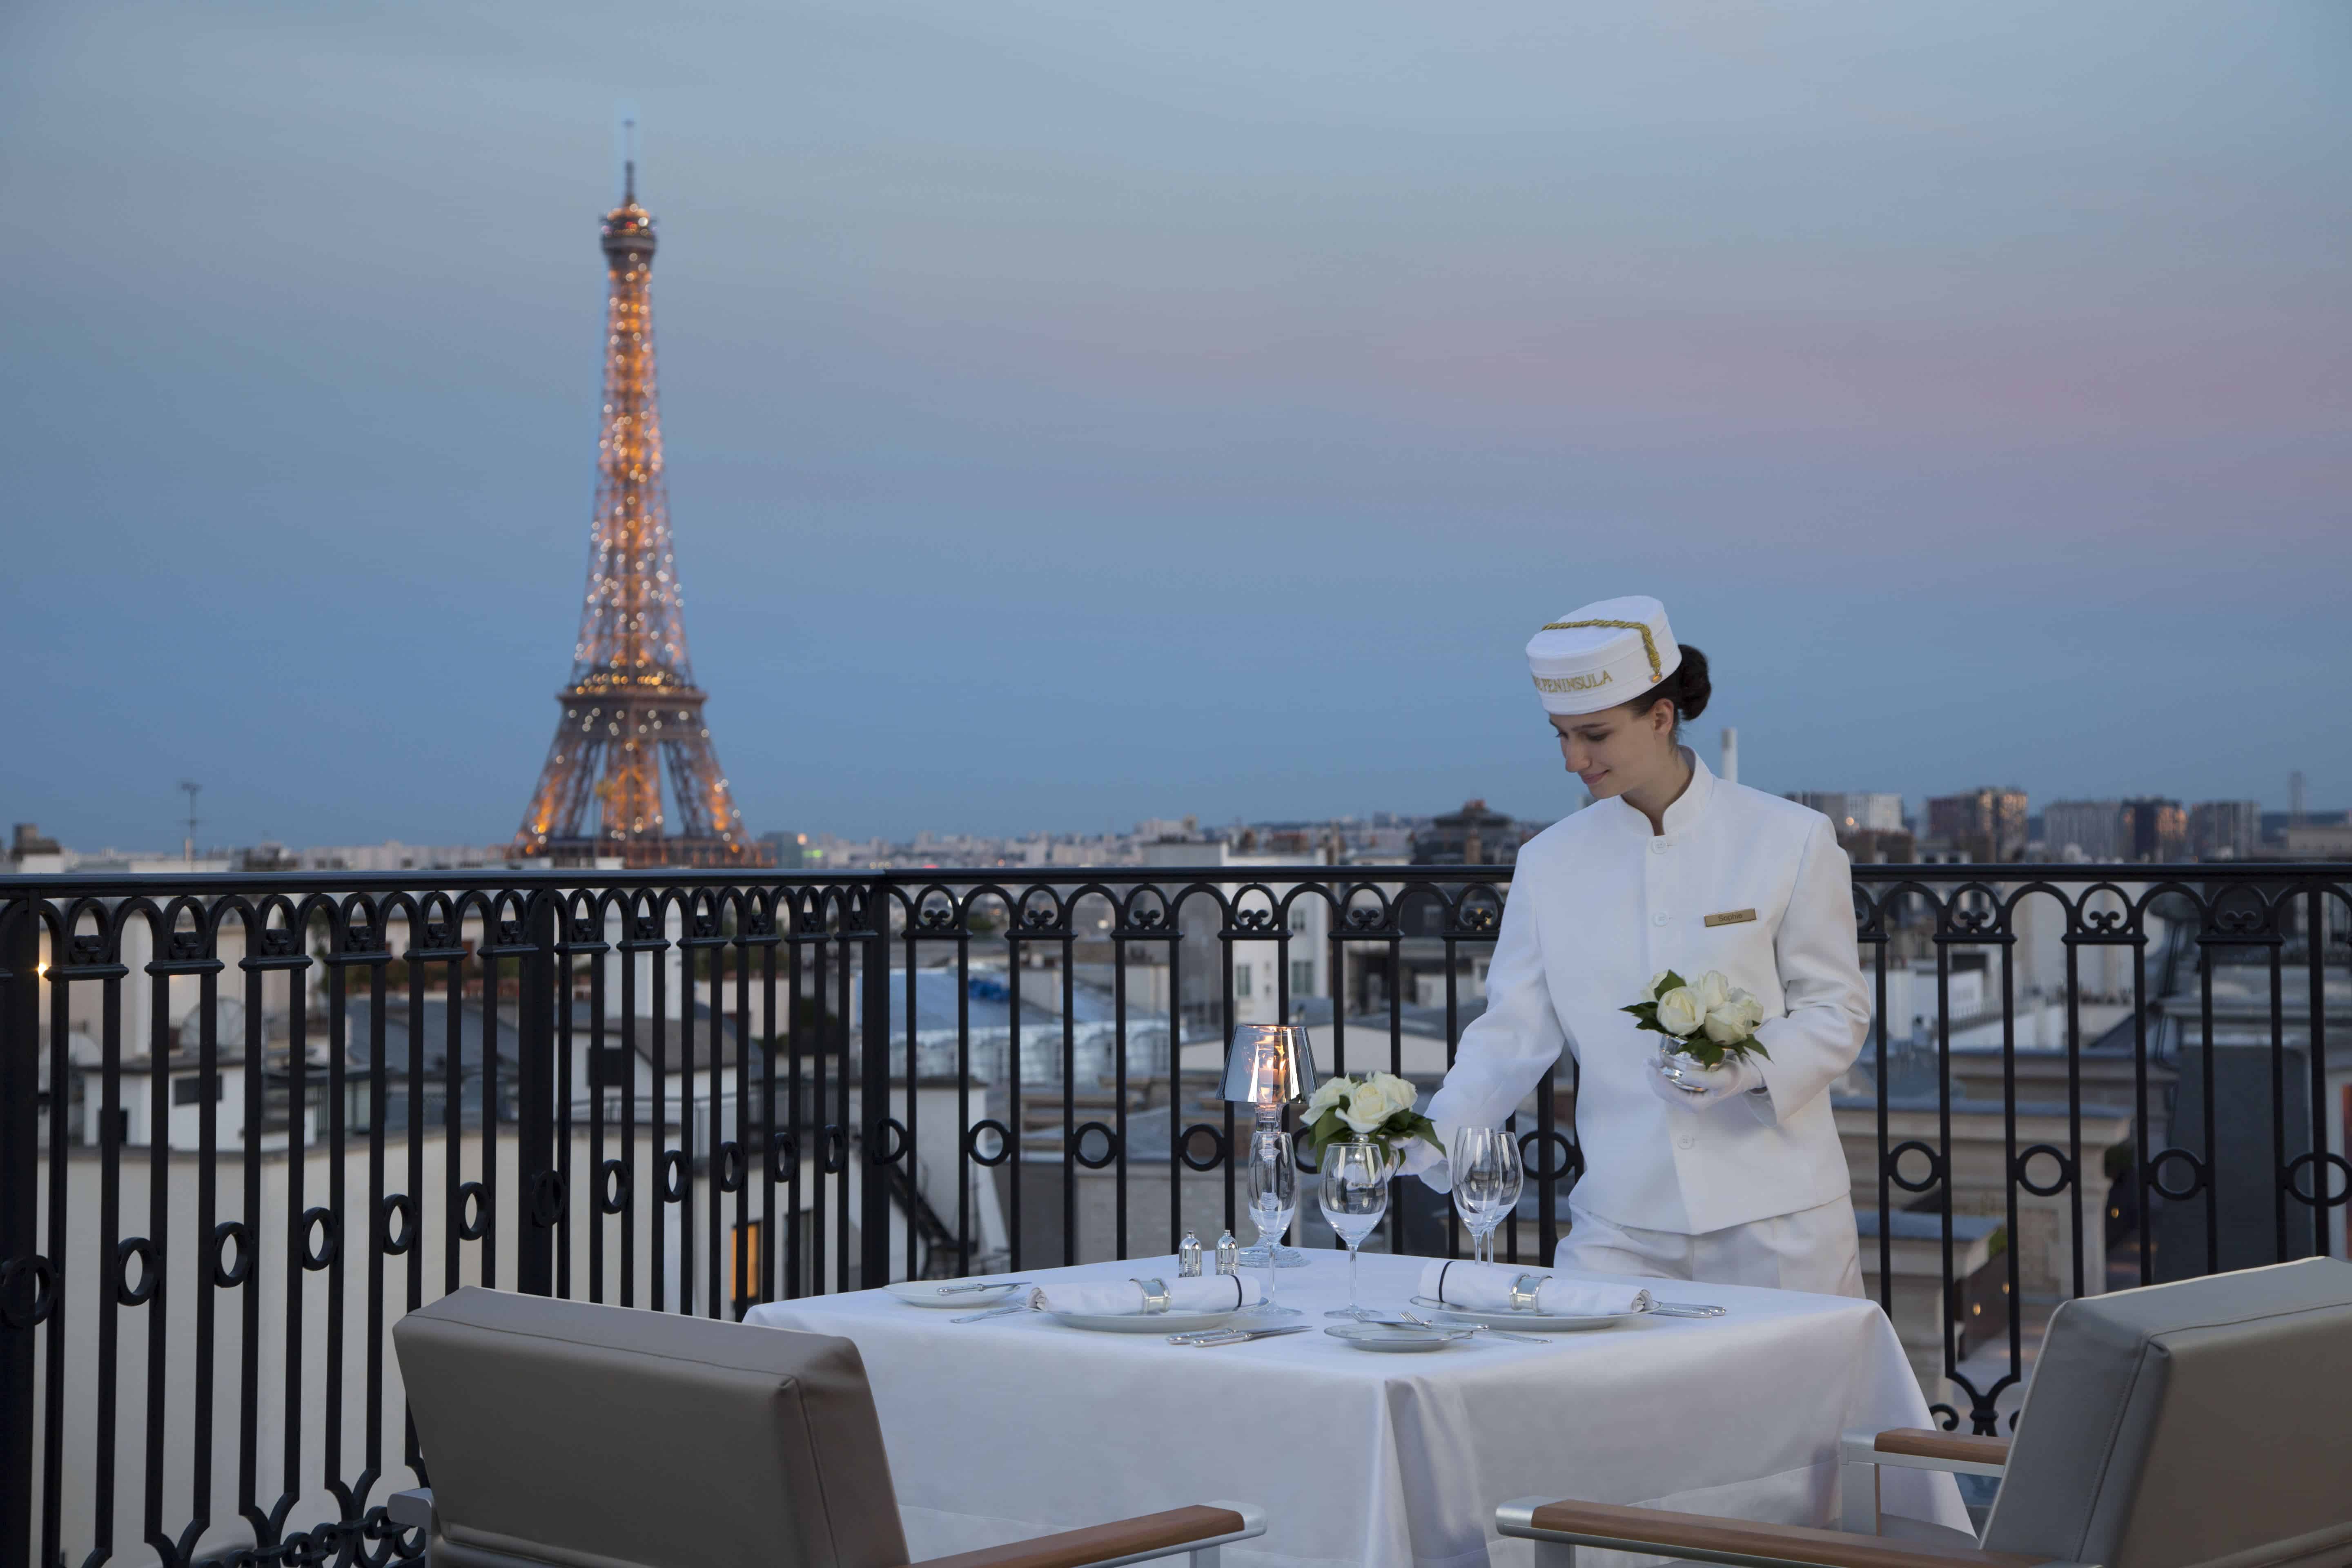 This photo is of a waiter in livery setting a beautiful table for a fancy dinner with an Eiffel Tower view. The Peninsula Paris is the top luxury hotel in Paris with Eiffel Tower view. 